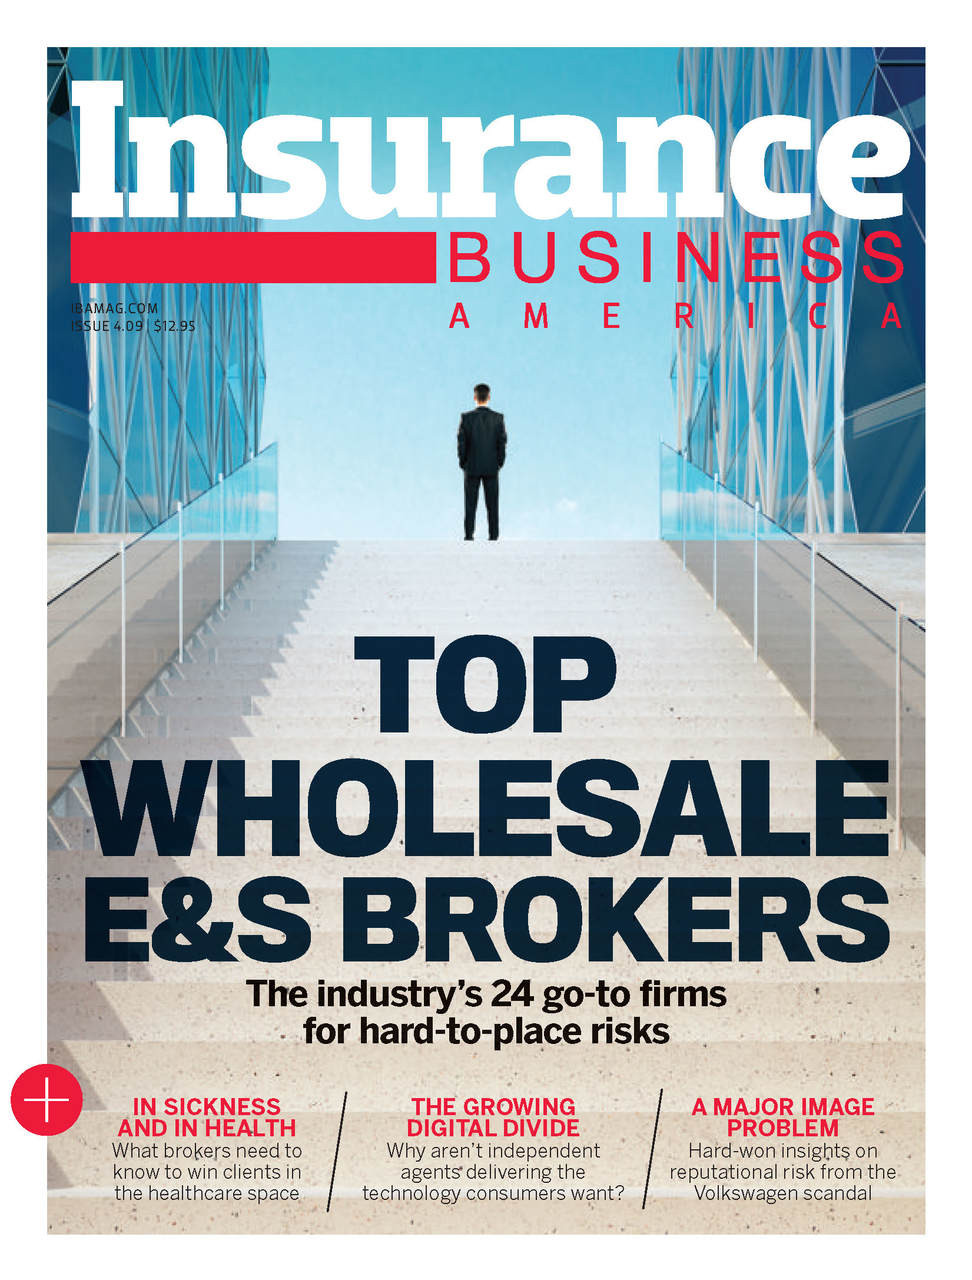 2016 Insurance Business Top Wholesale E&S Brokers (available for immediate download) Key Media